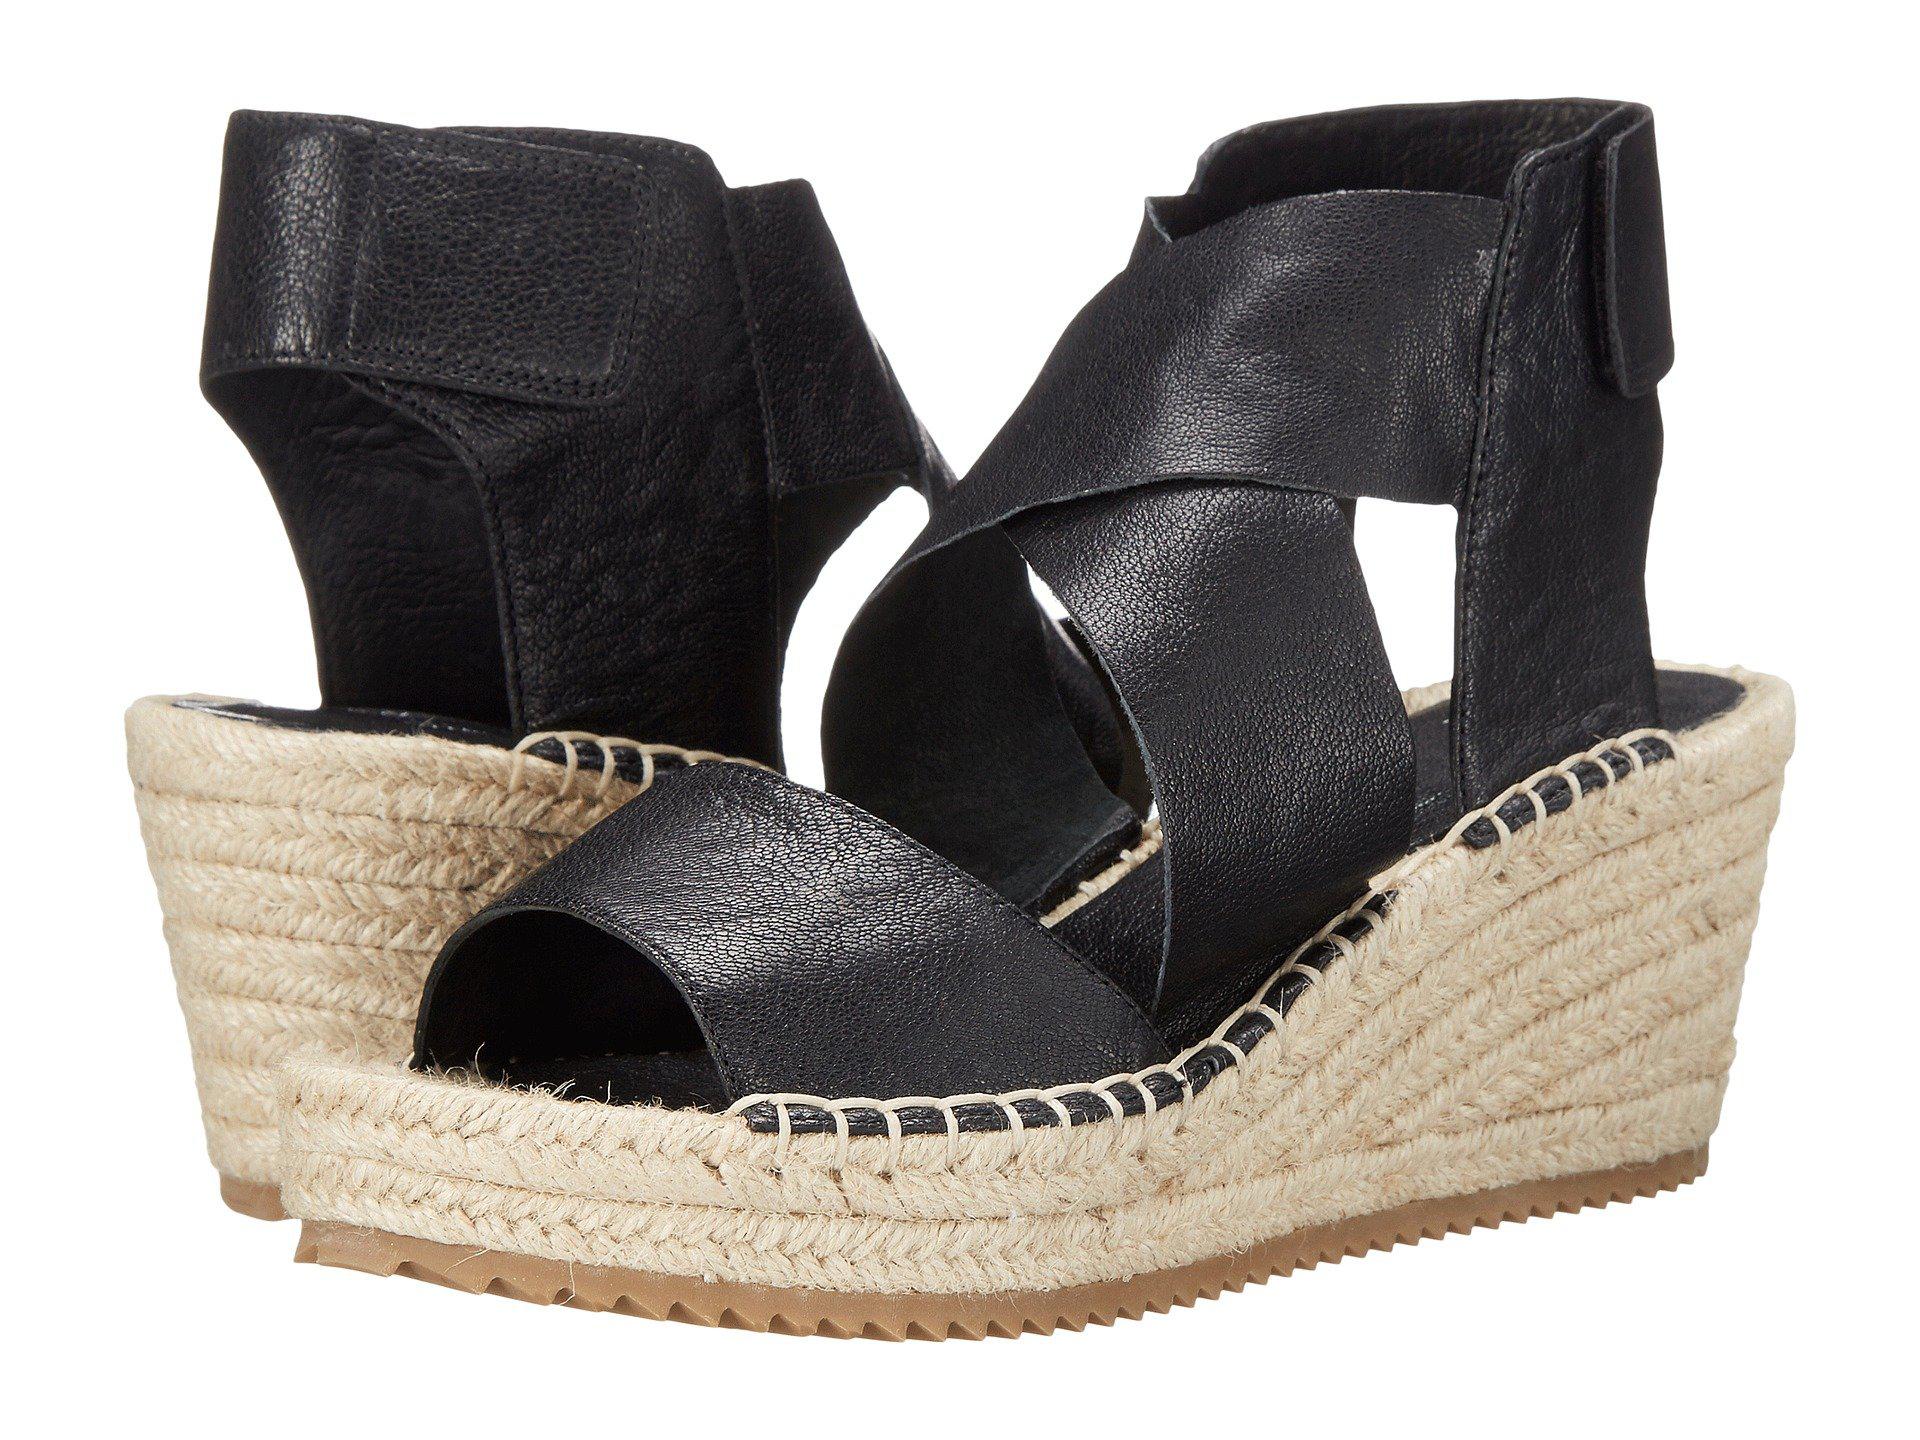 Lyst - Eileen Fisher 'willow' Espadrille Wedge Sandal in Black - Save ...